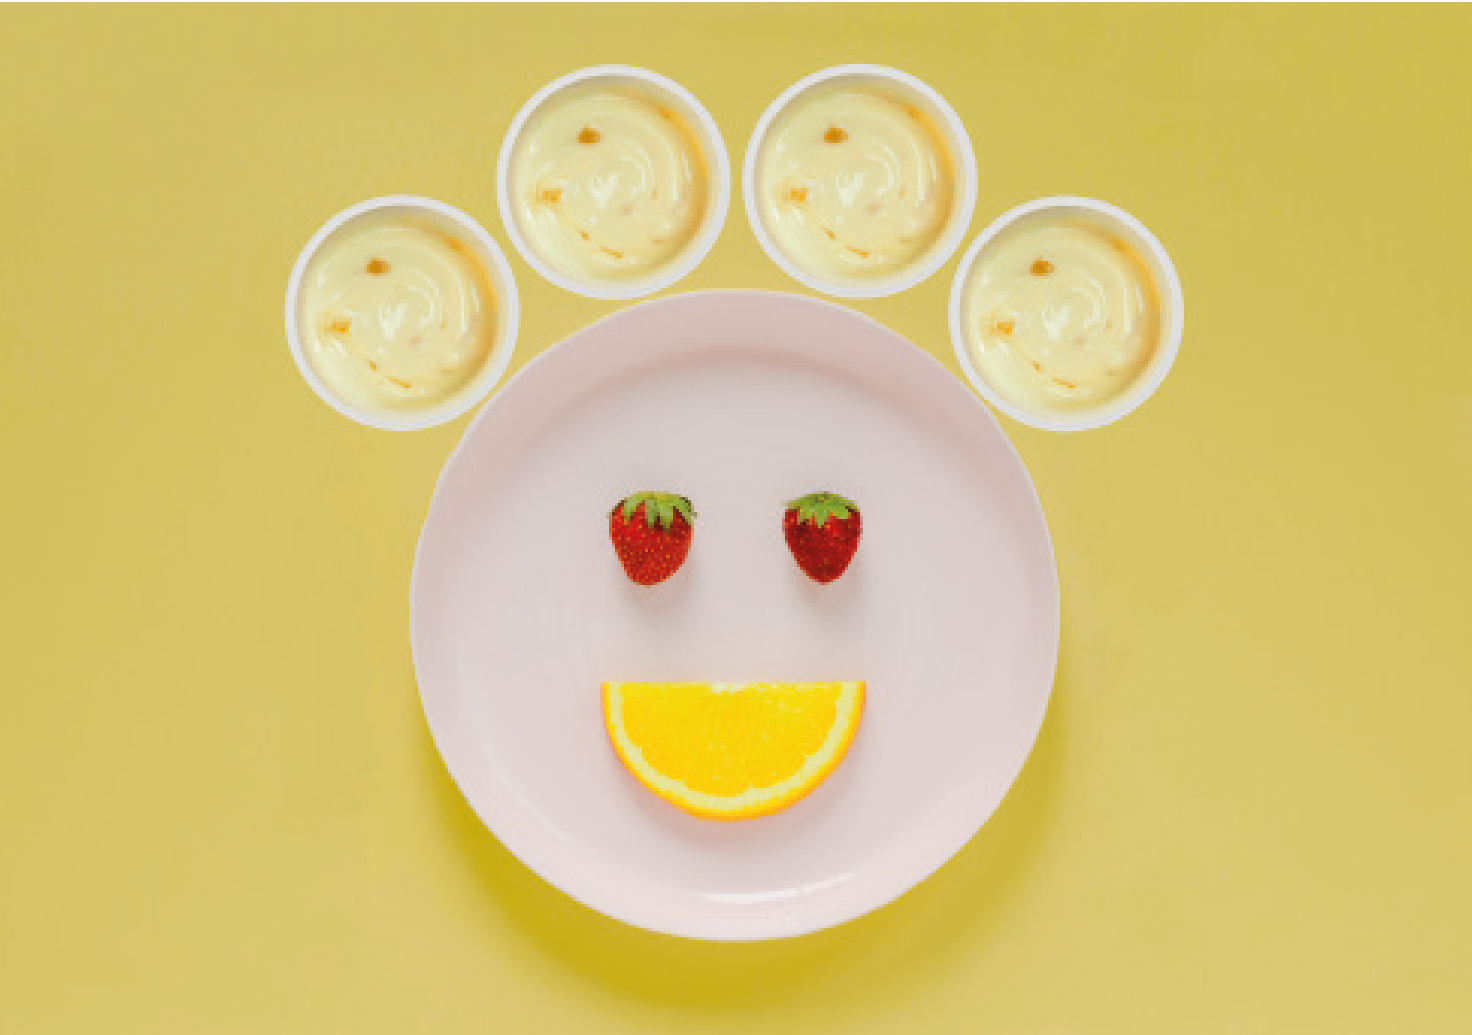 Can this yogurt boost your happiness?